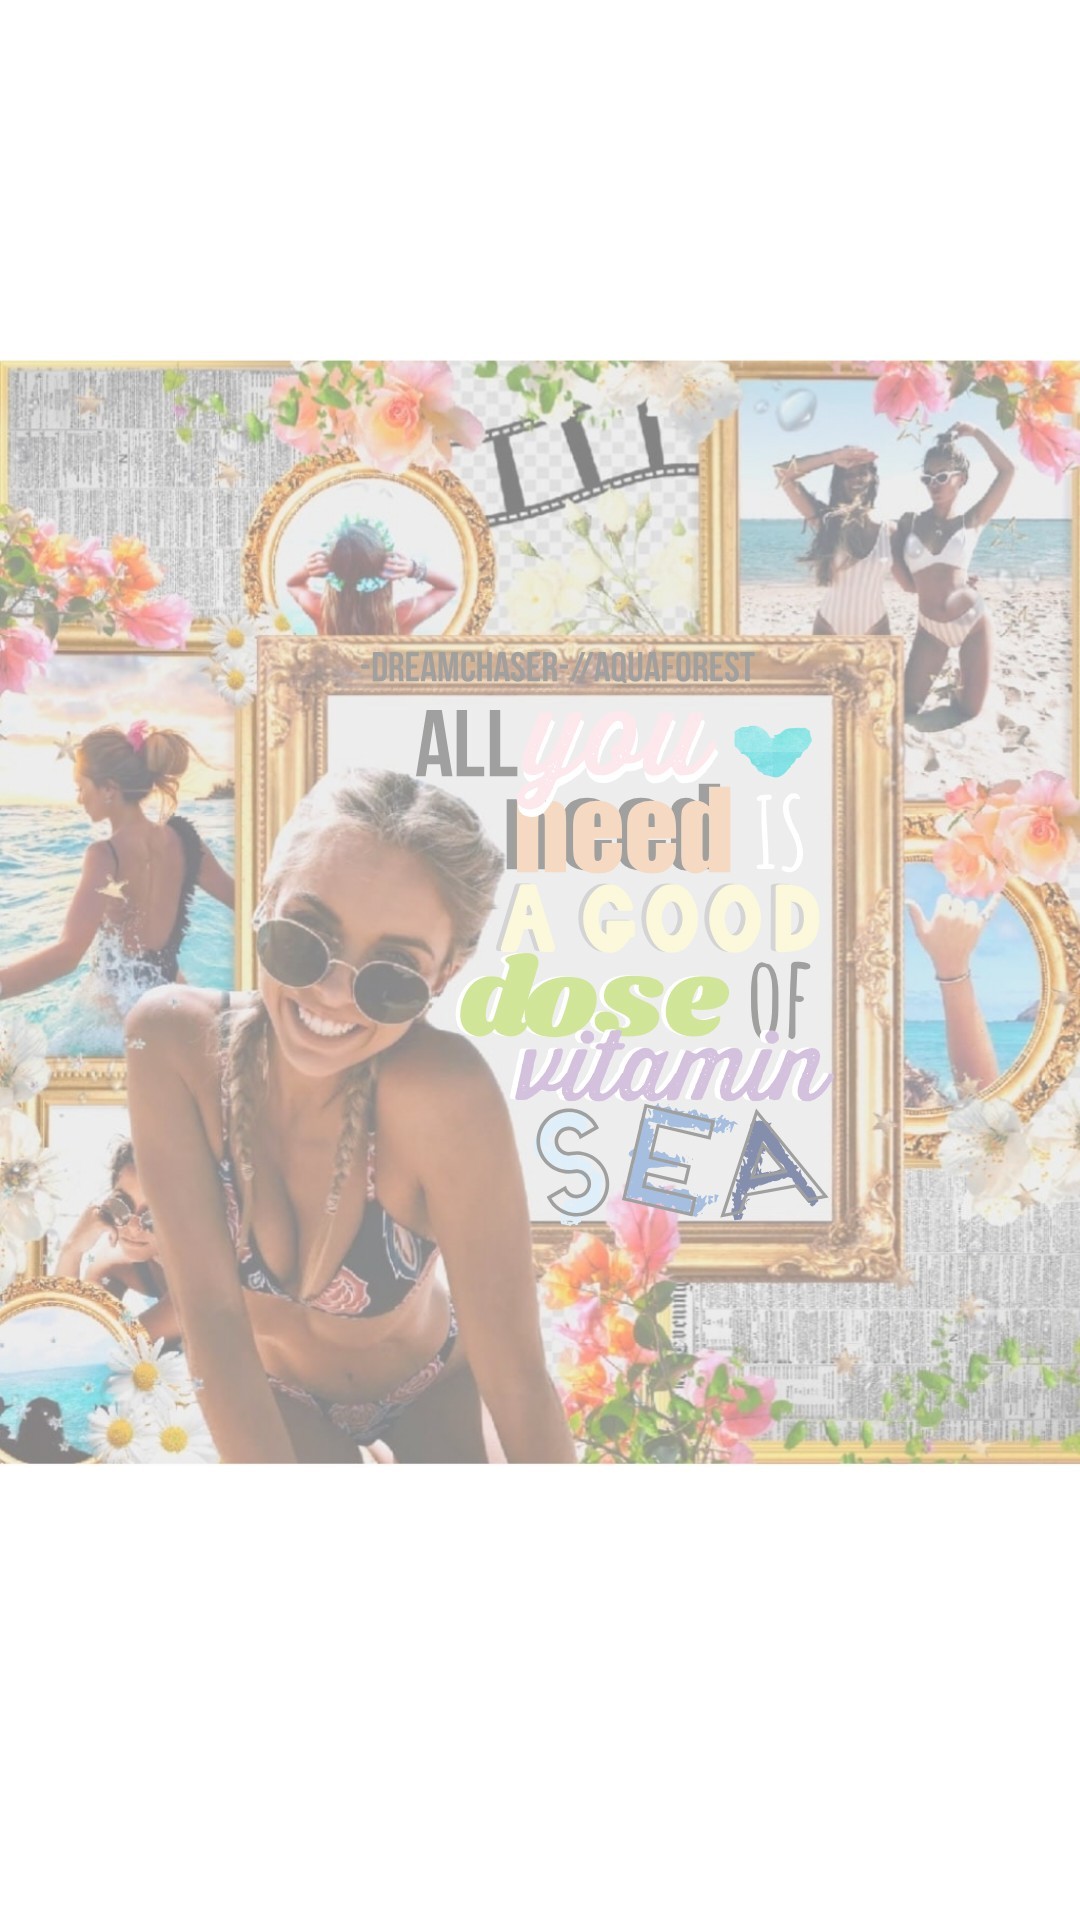 🥁Collab with.....🥁
aquaforest!!!!!! I feel like soo honored to be collabing with her, her collages are STUNNINGG👏🏼🦋💞 I did the terrible text and SHE DID THE AMAZING BACKGROUND AND PNGS!! Go follow her now!